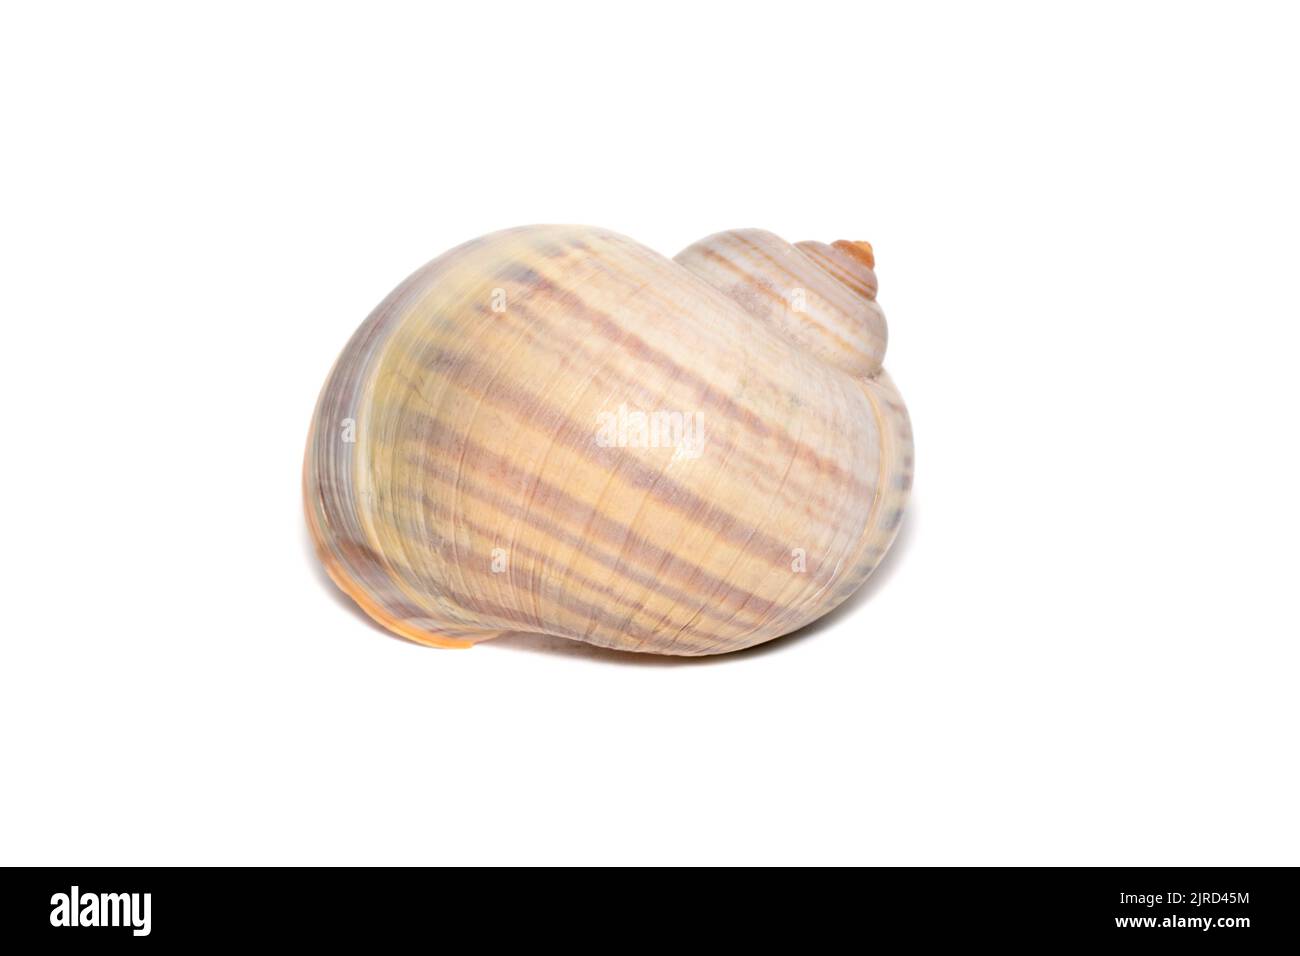 Image of large empty ocean snail shell on a white background. Undersea Animals. Sea shells. Stock Photo